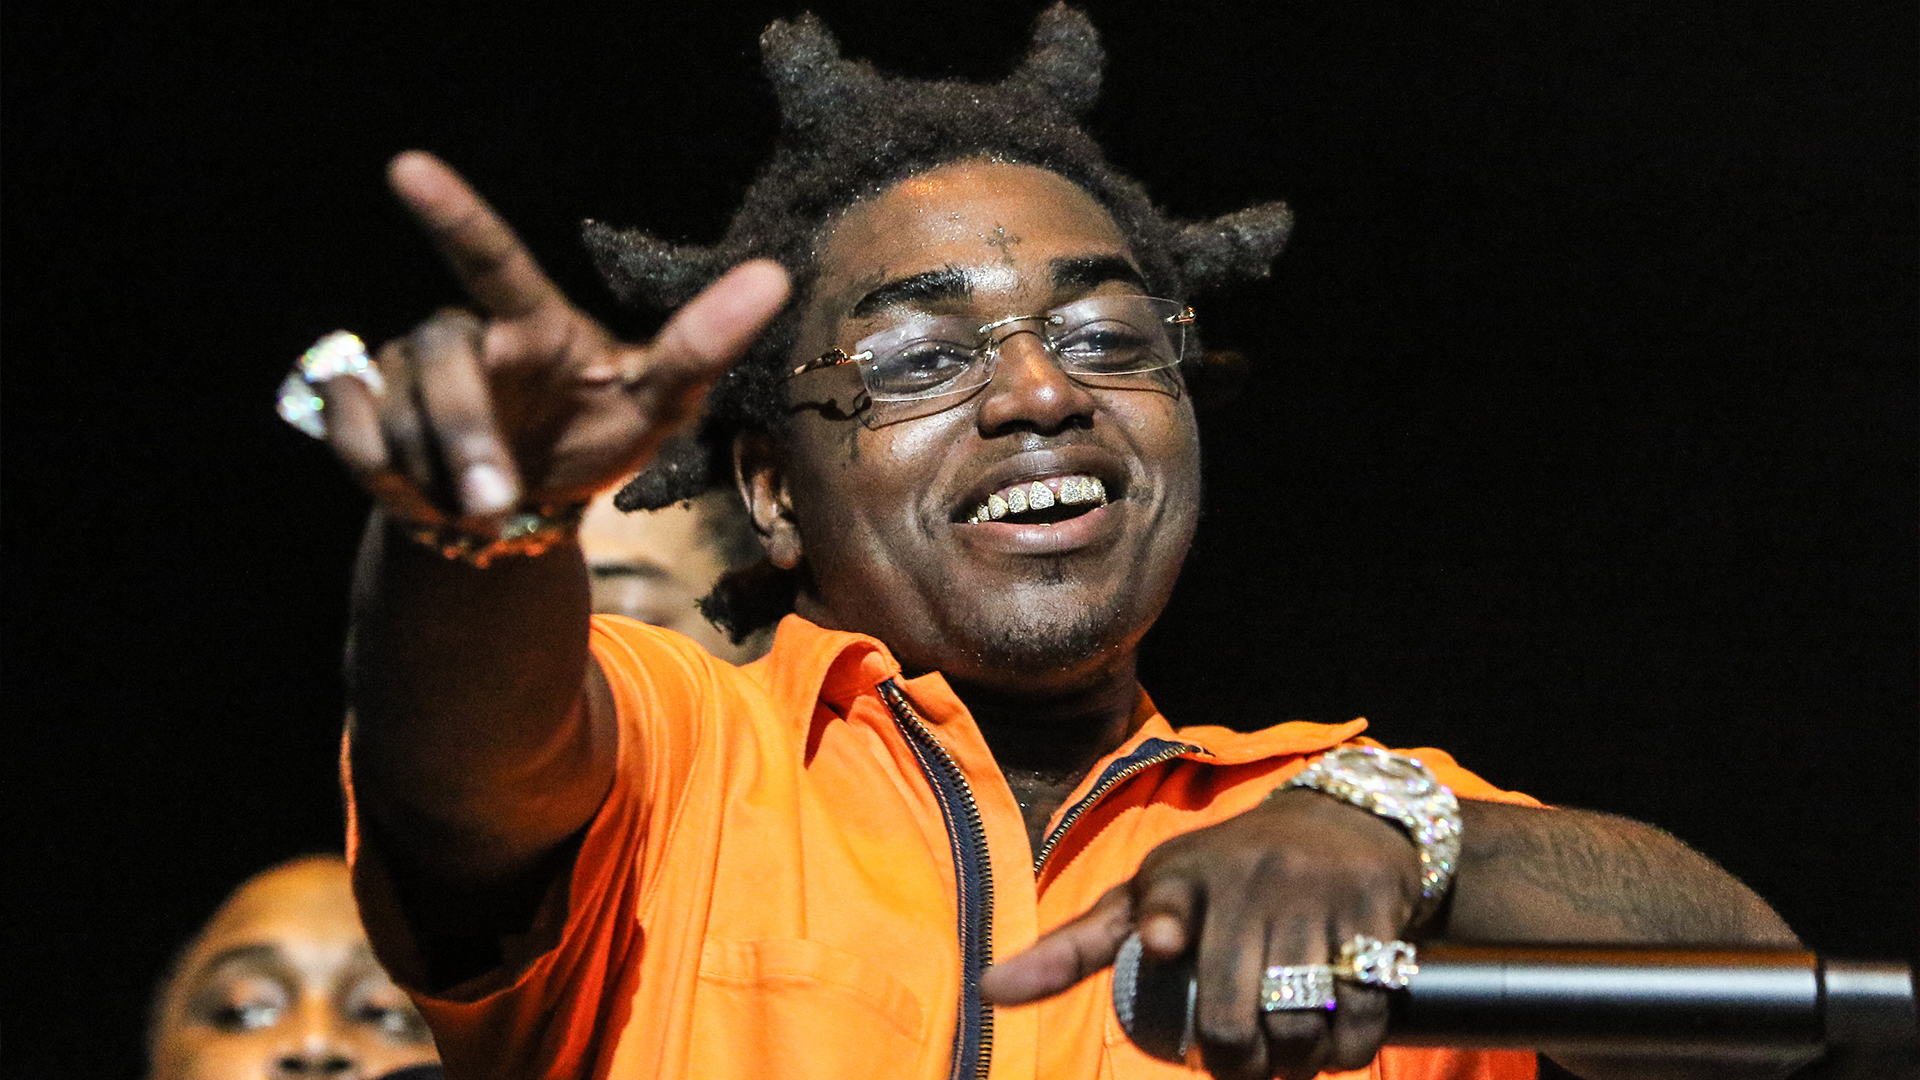 Kodak Black Is Ready To Be Paid In Bitcoin — 'If I Get $300K For A Show, Send Me, Like, $100K In Bitcoin'